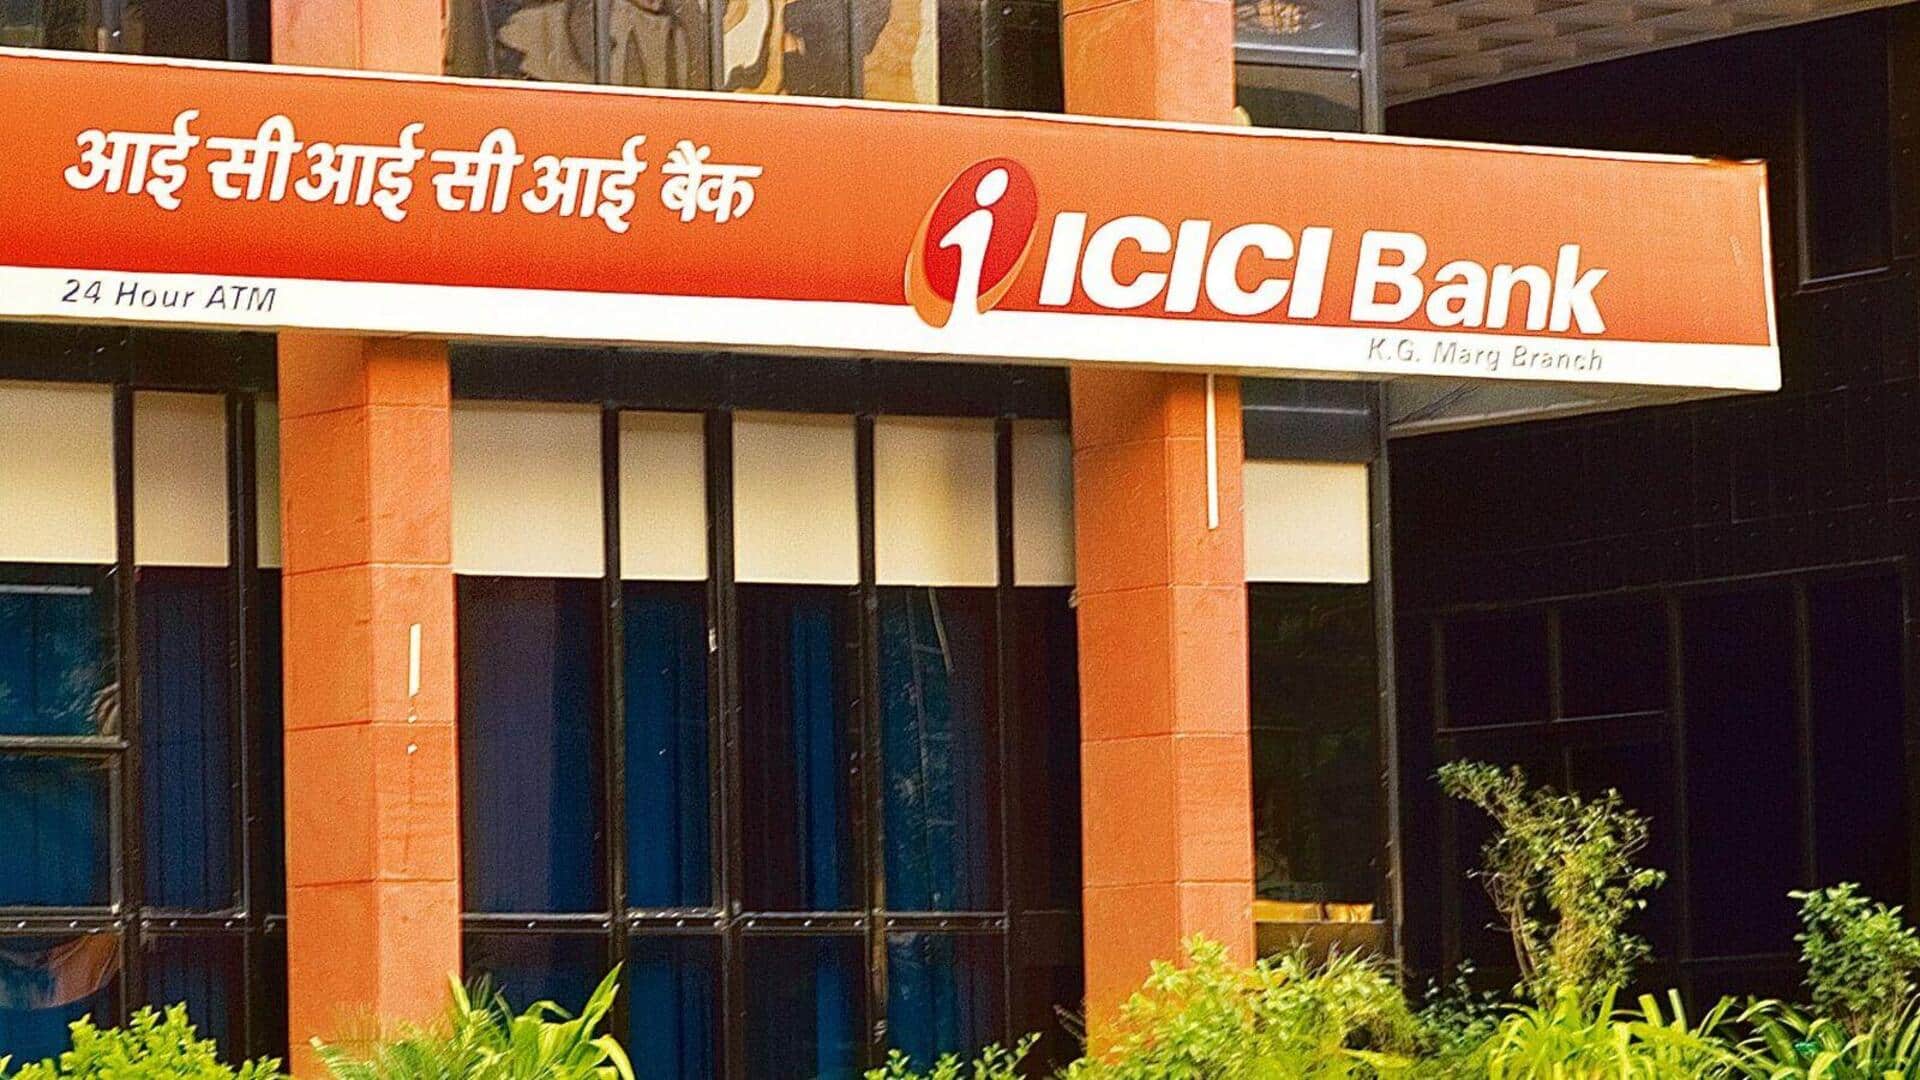 ICICI Bank's Q3 results: Net profit climbs to Rs. 10,272cr